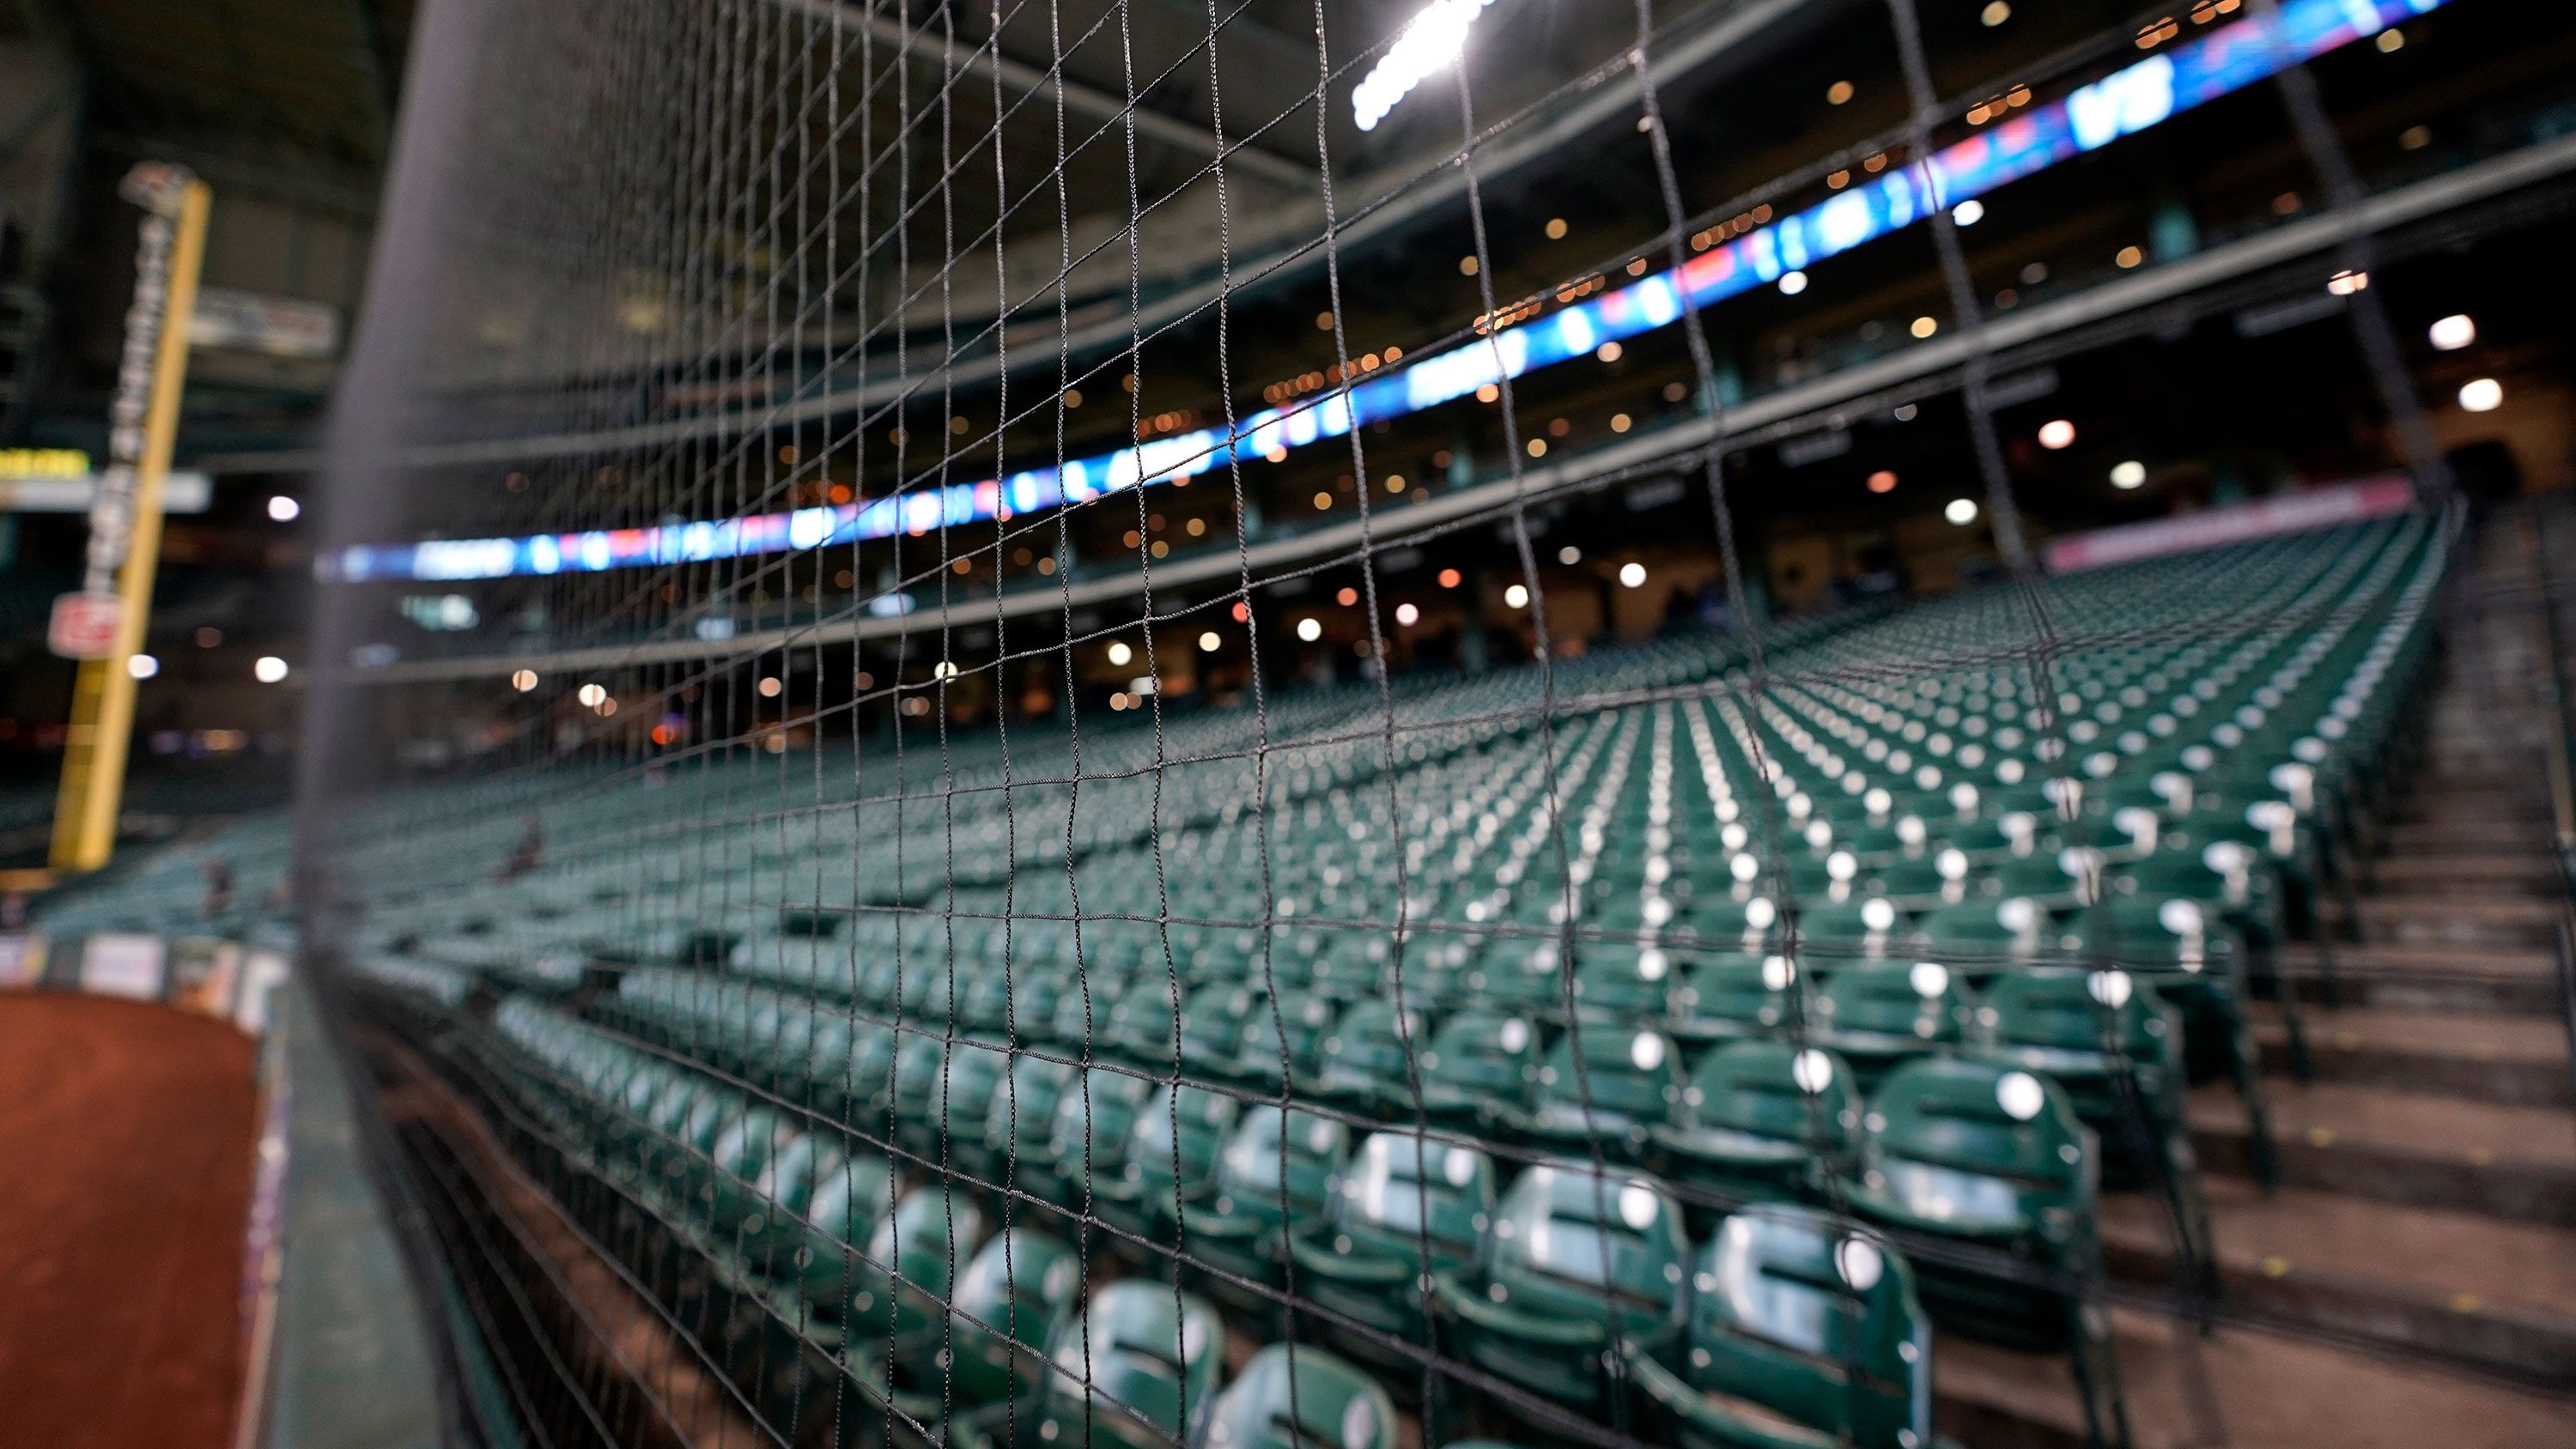 Astros install additional protective netting at Minute Maid Park